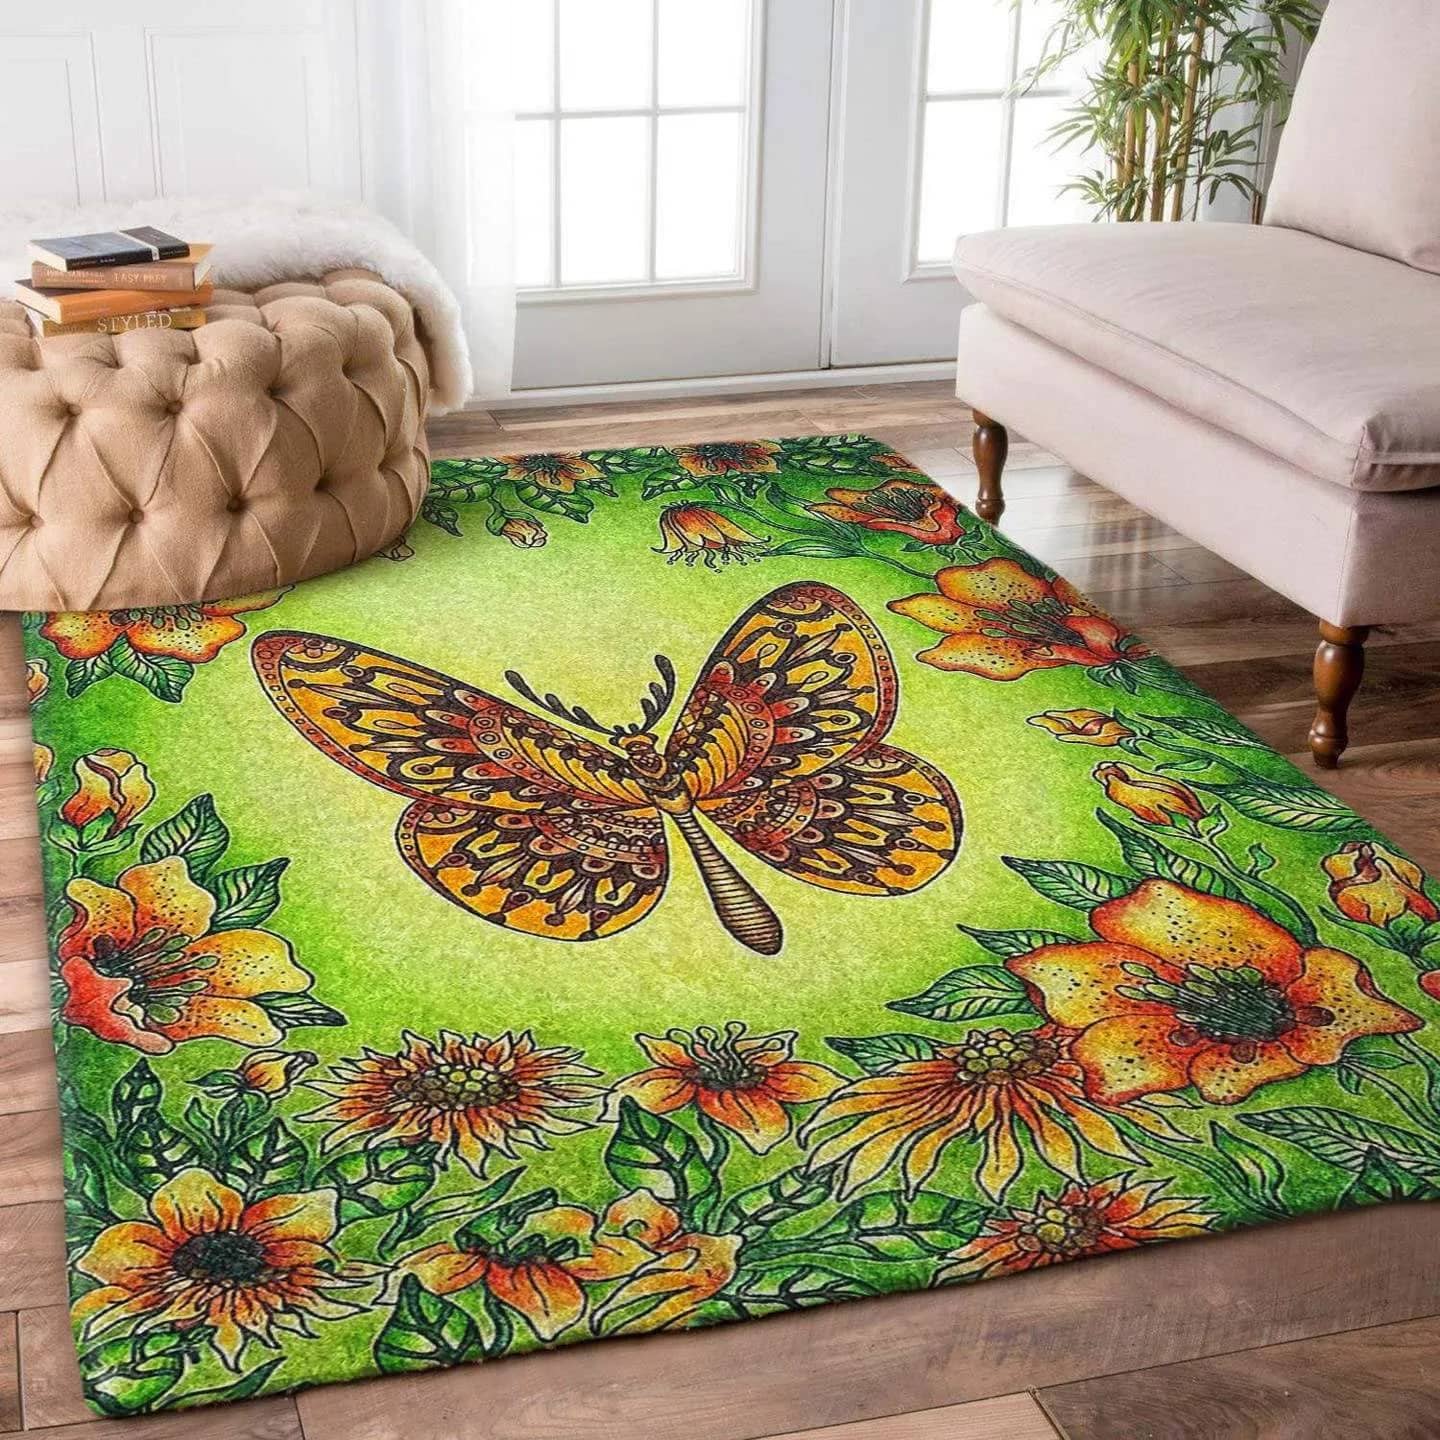 Butterfly Limited Edition Amazon Best Seller Sku 262537 Rug